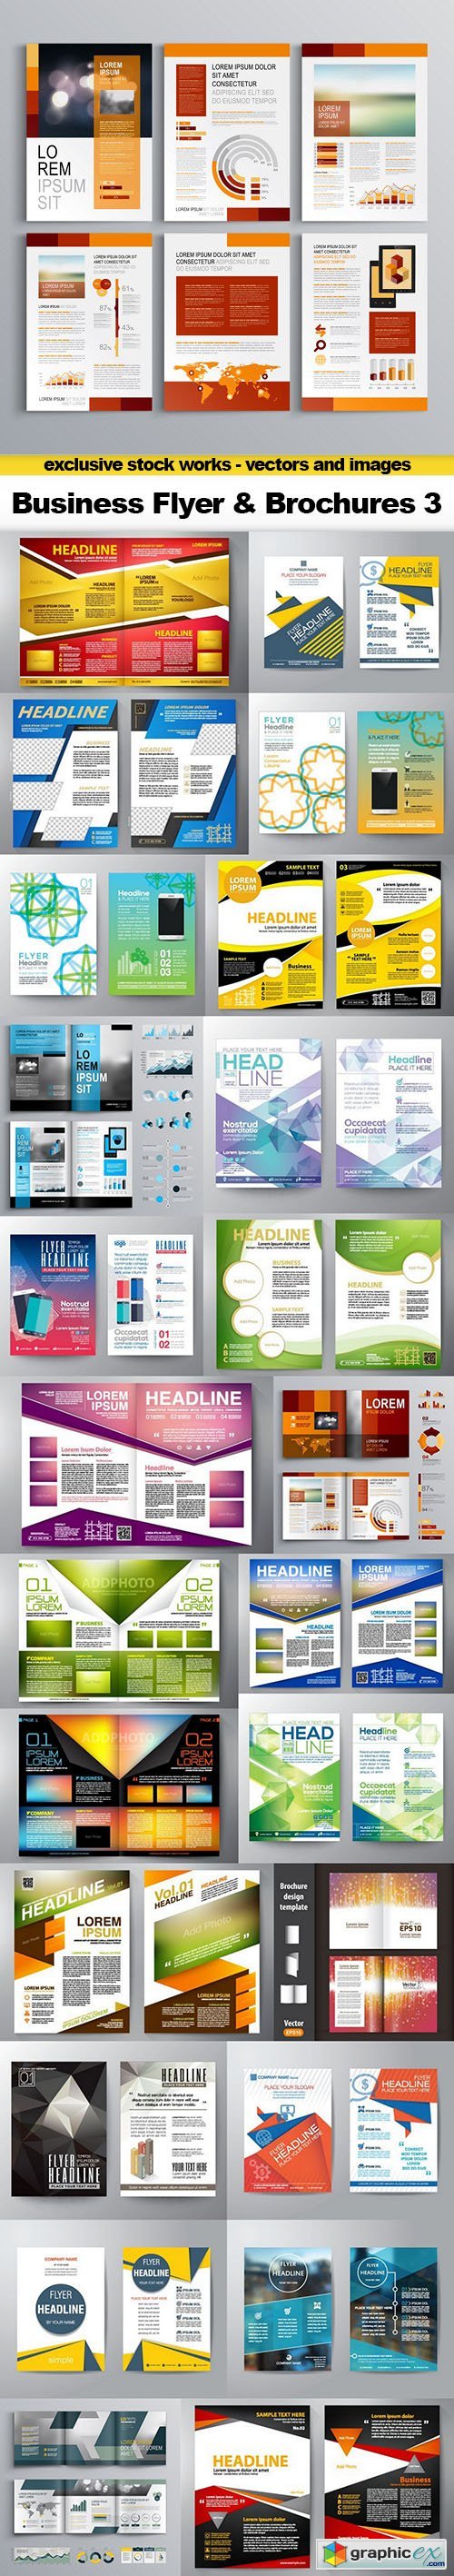 Business Flyer and Brochures - Design Collection 3, - 25xEPS